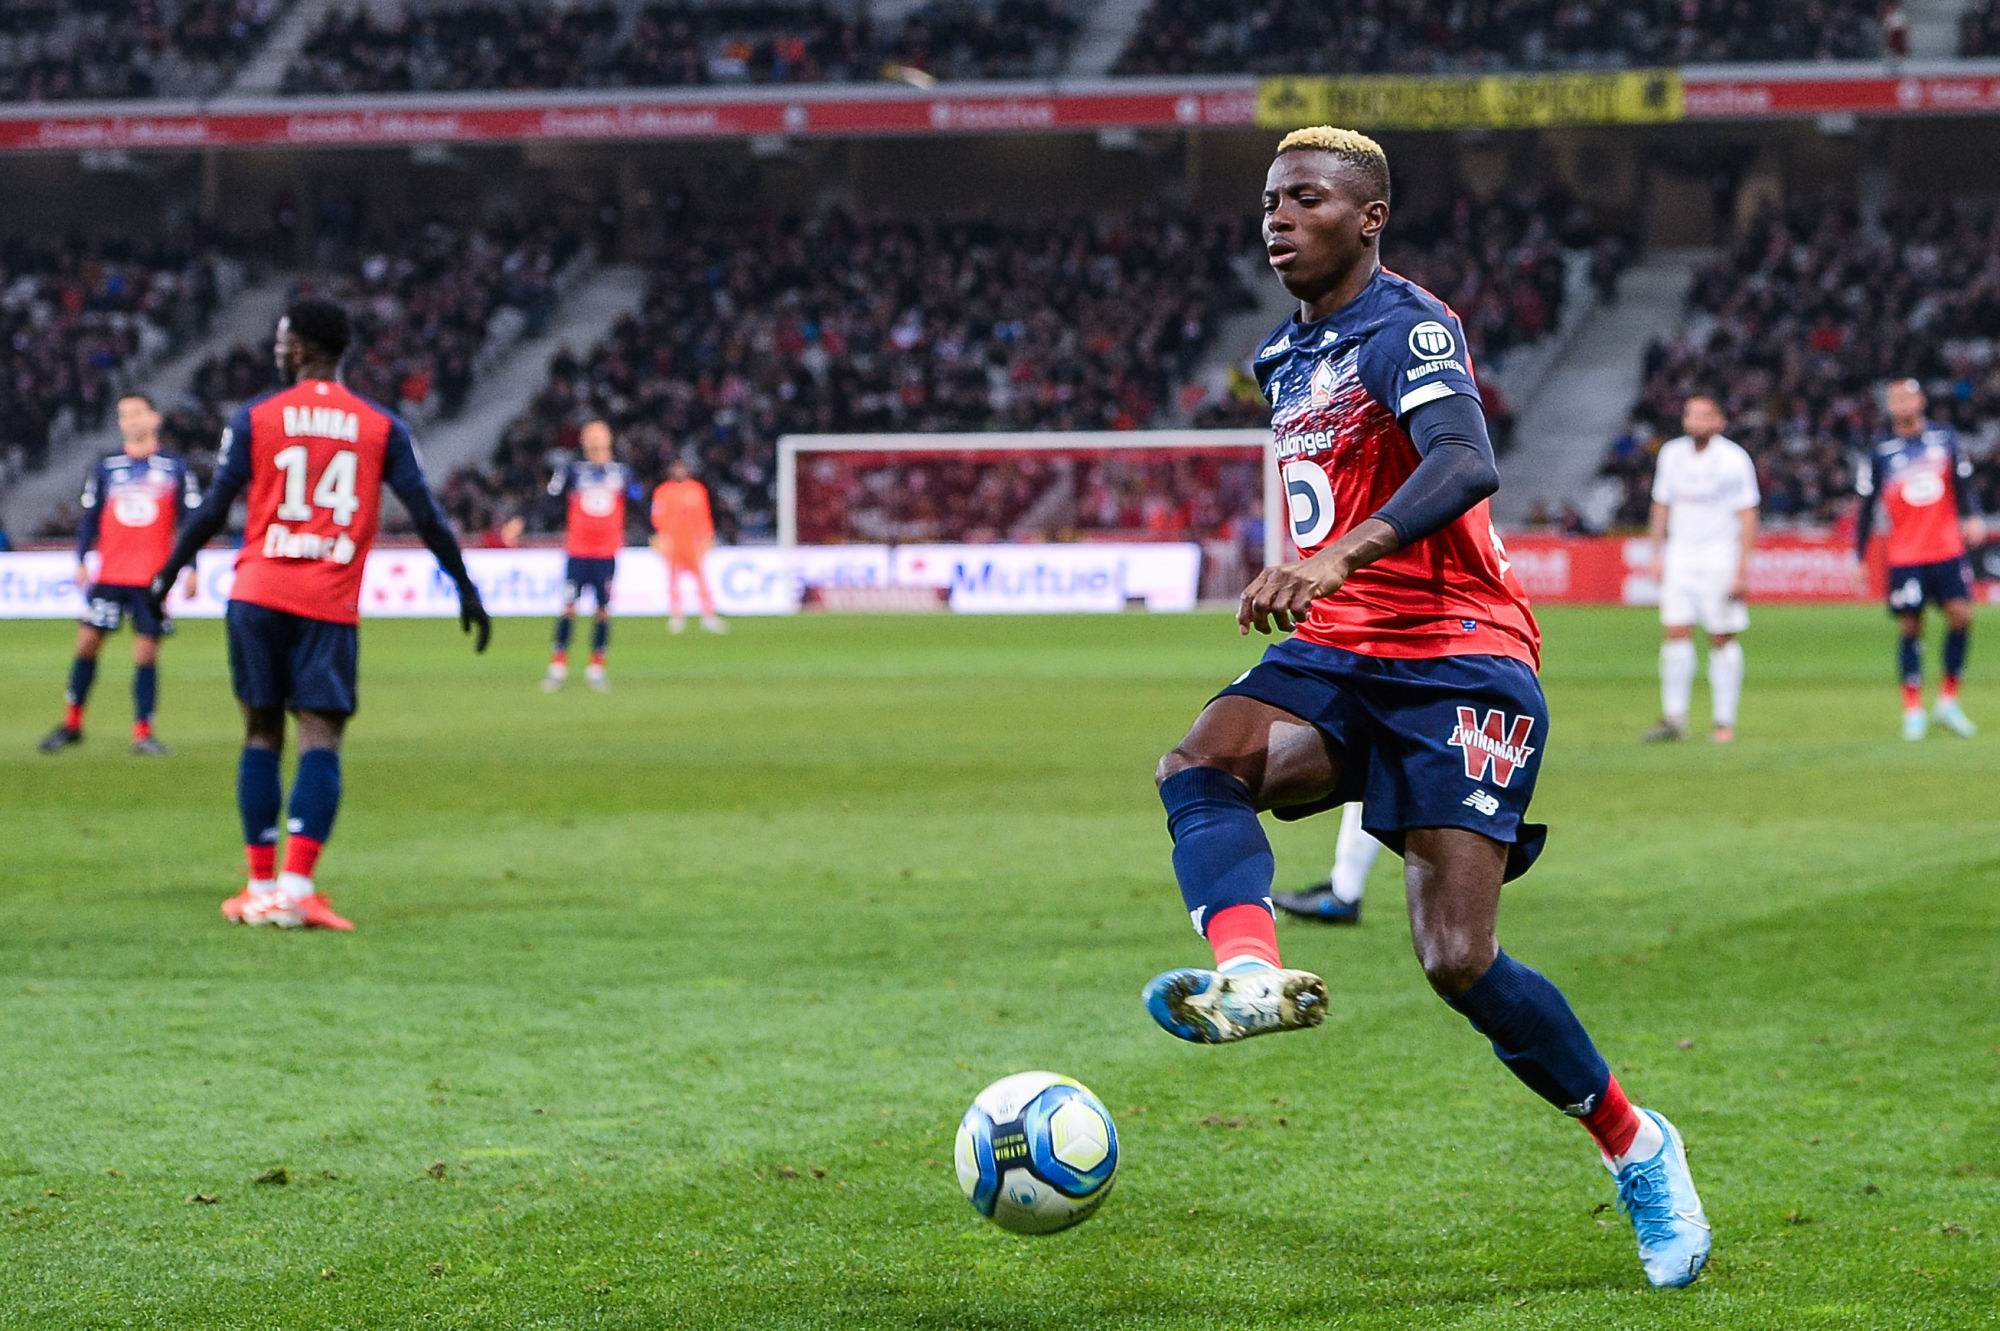 Victor OSIMHEN of Lille during the French Ligue 1 soccer match between Lille OSC and Montpellier HSC at Stade Pierre Mauroy on December 13, 2019 in Lille, France. (Photo by Baptiste Fernandez/Icon Sport) - Victor OSIMHEN - Stade Pierre Mauroy - Lille (France)